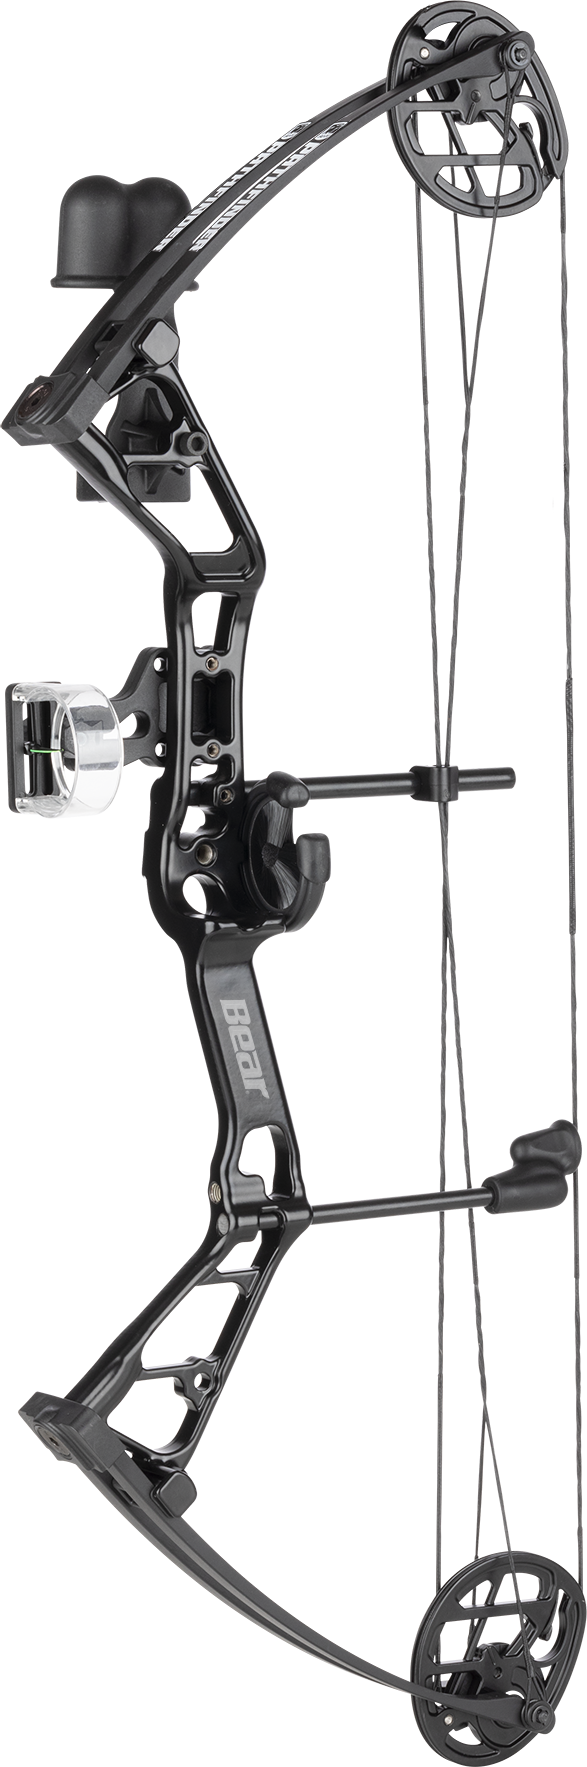 Bear Archery Pathfinder Youth Compound Bow Setup - Youth Hunting Bow